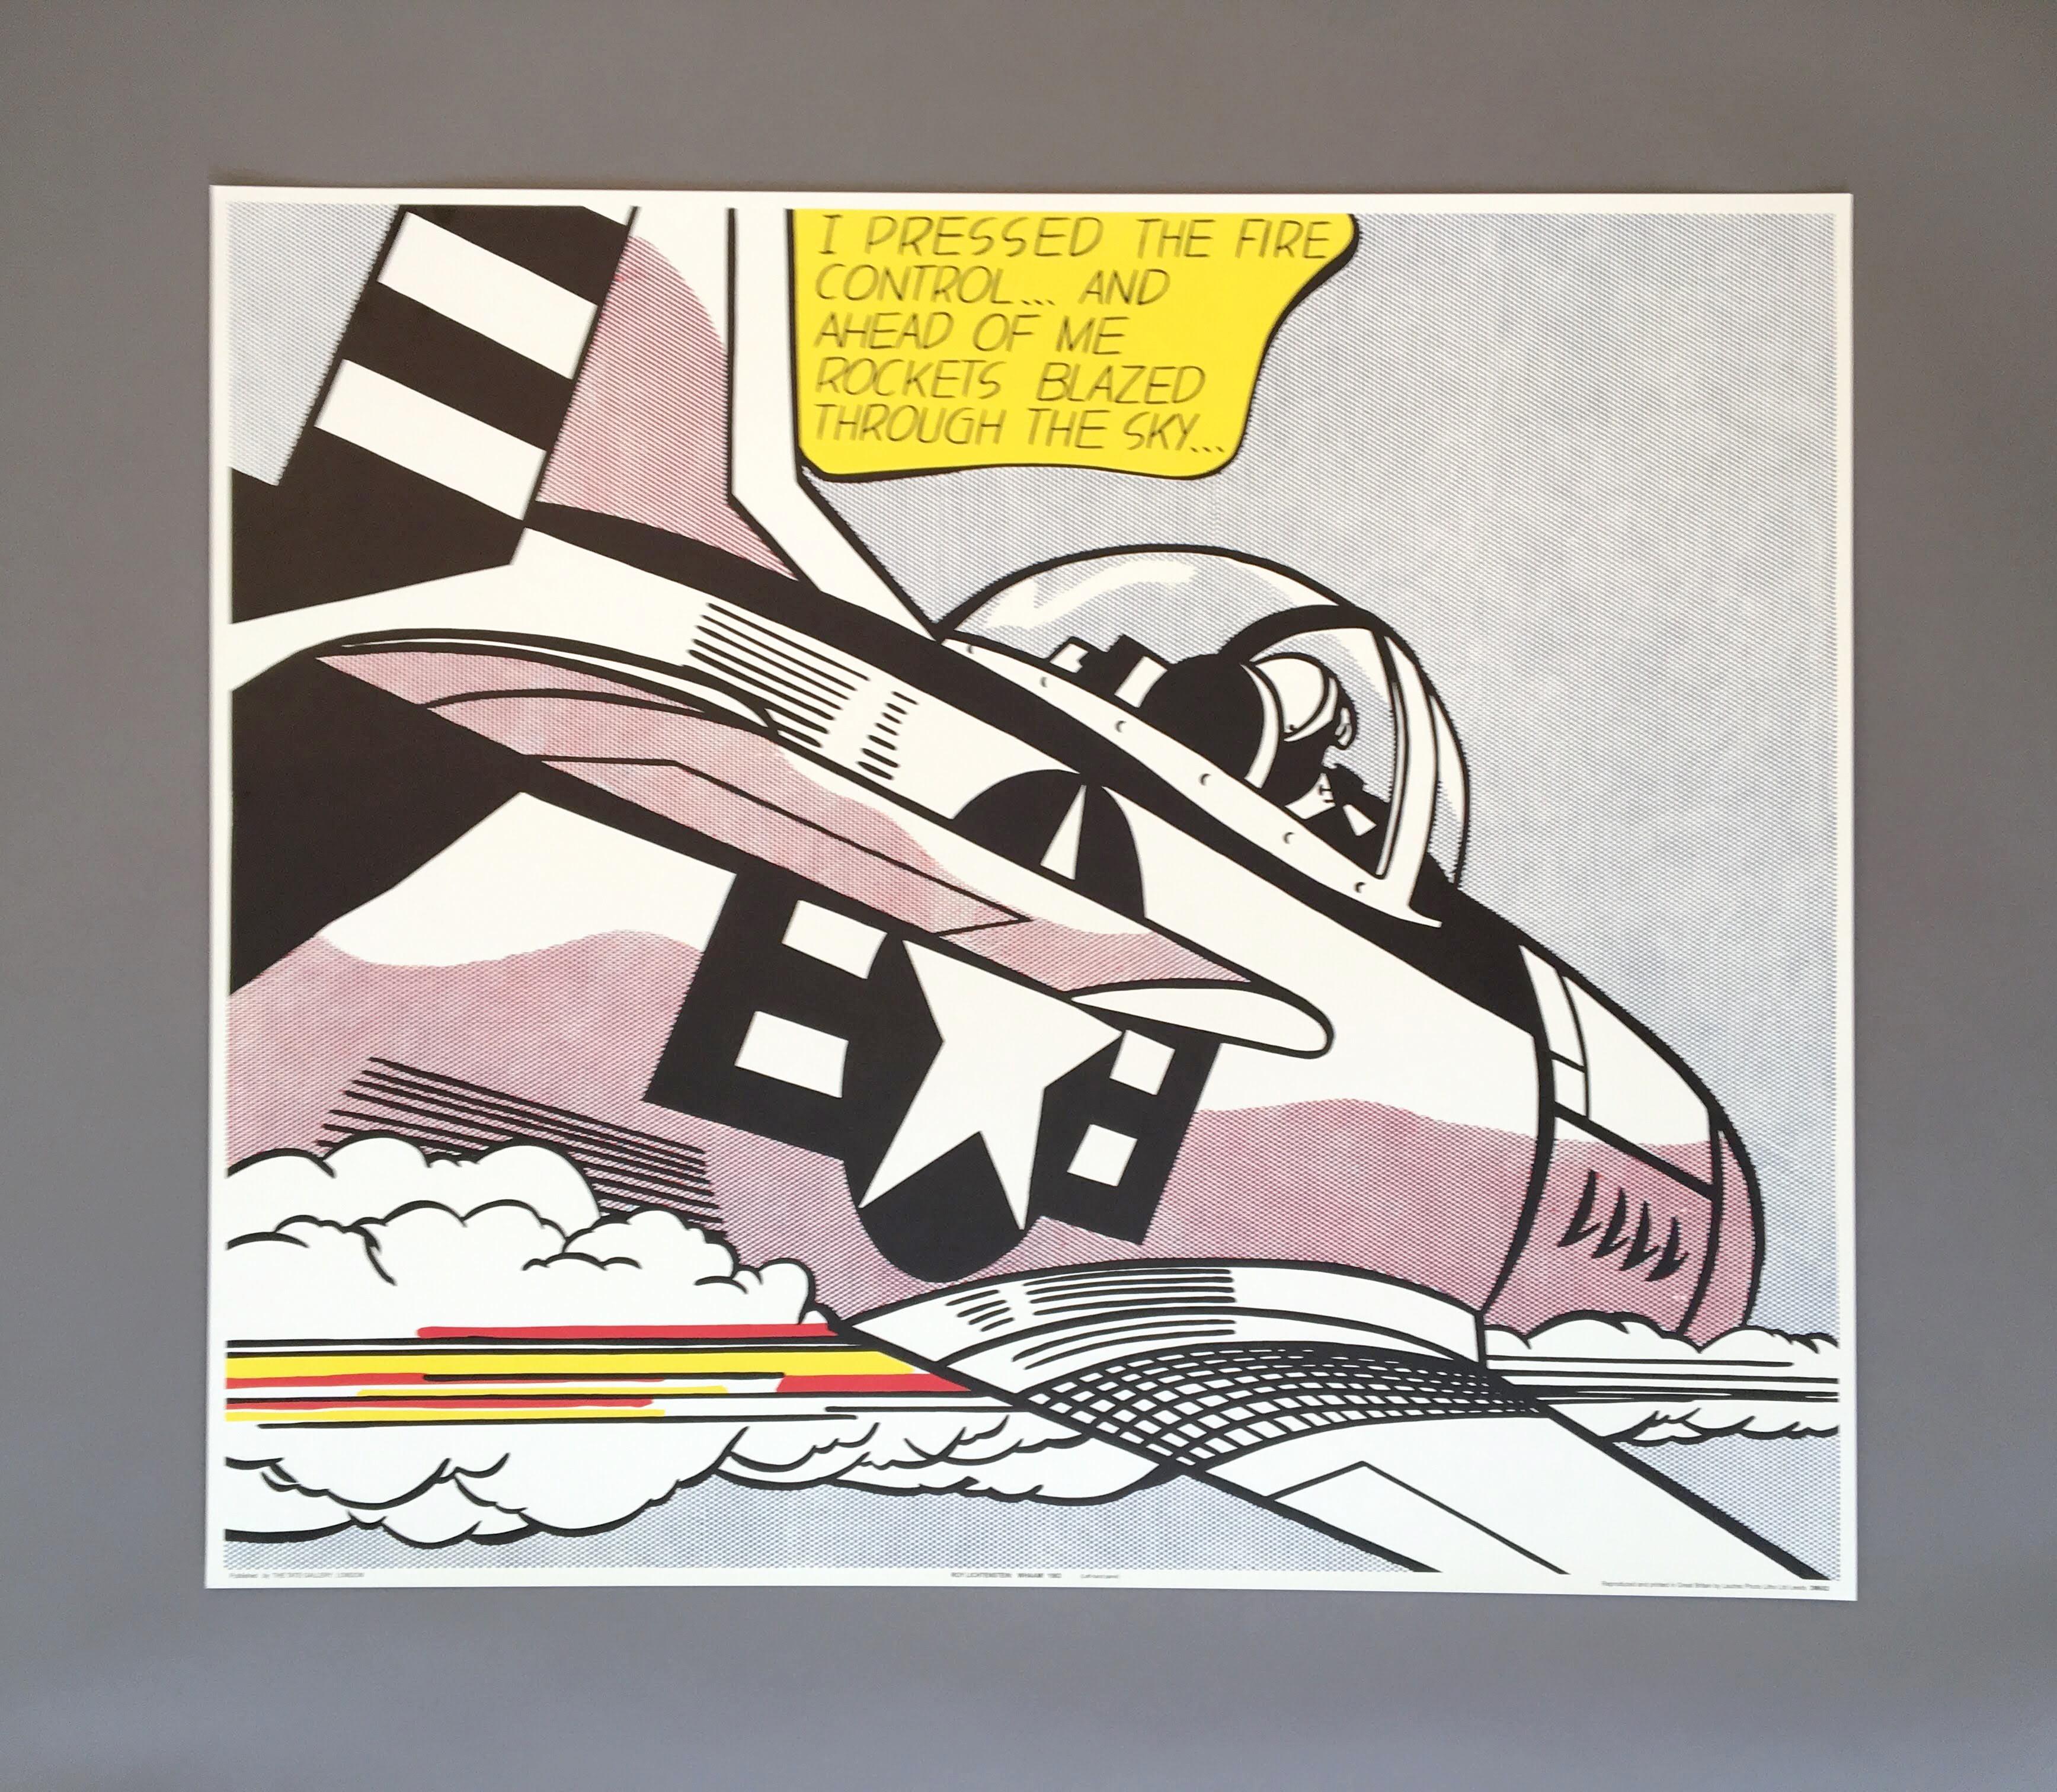 Roy Lichtenstein (United States, 1923-1997)
'Whaam!', 1984
 
This beautiful two-piece set depicts Lichtenstein's famous painting ''Whaam!' from 1963 for Tate Gallery, London and is featured in their current collection. This print set is from 1984